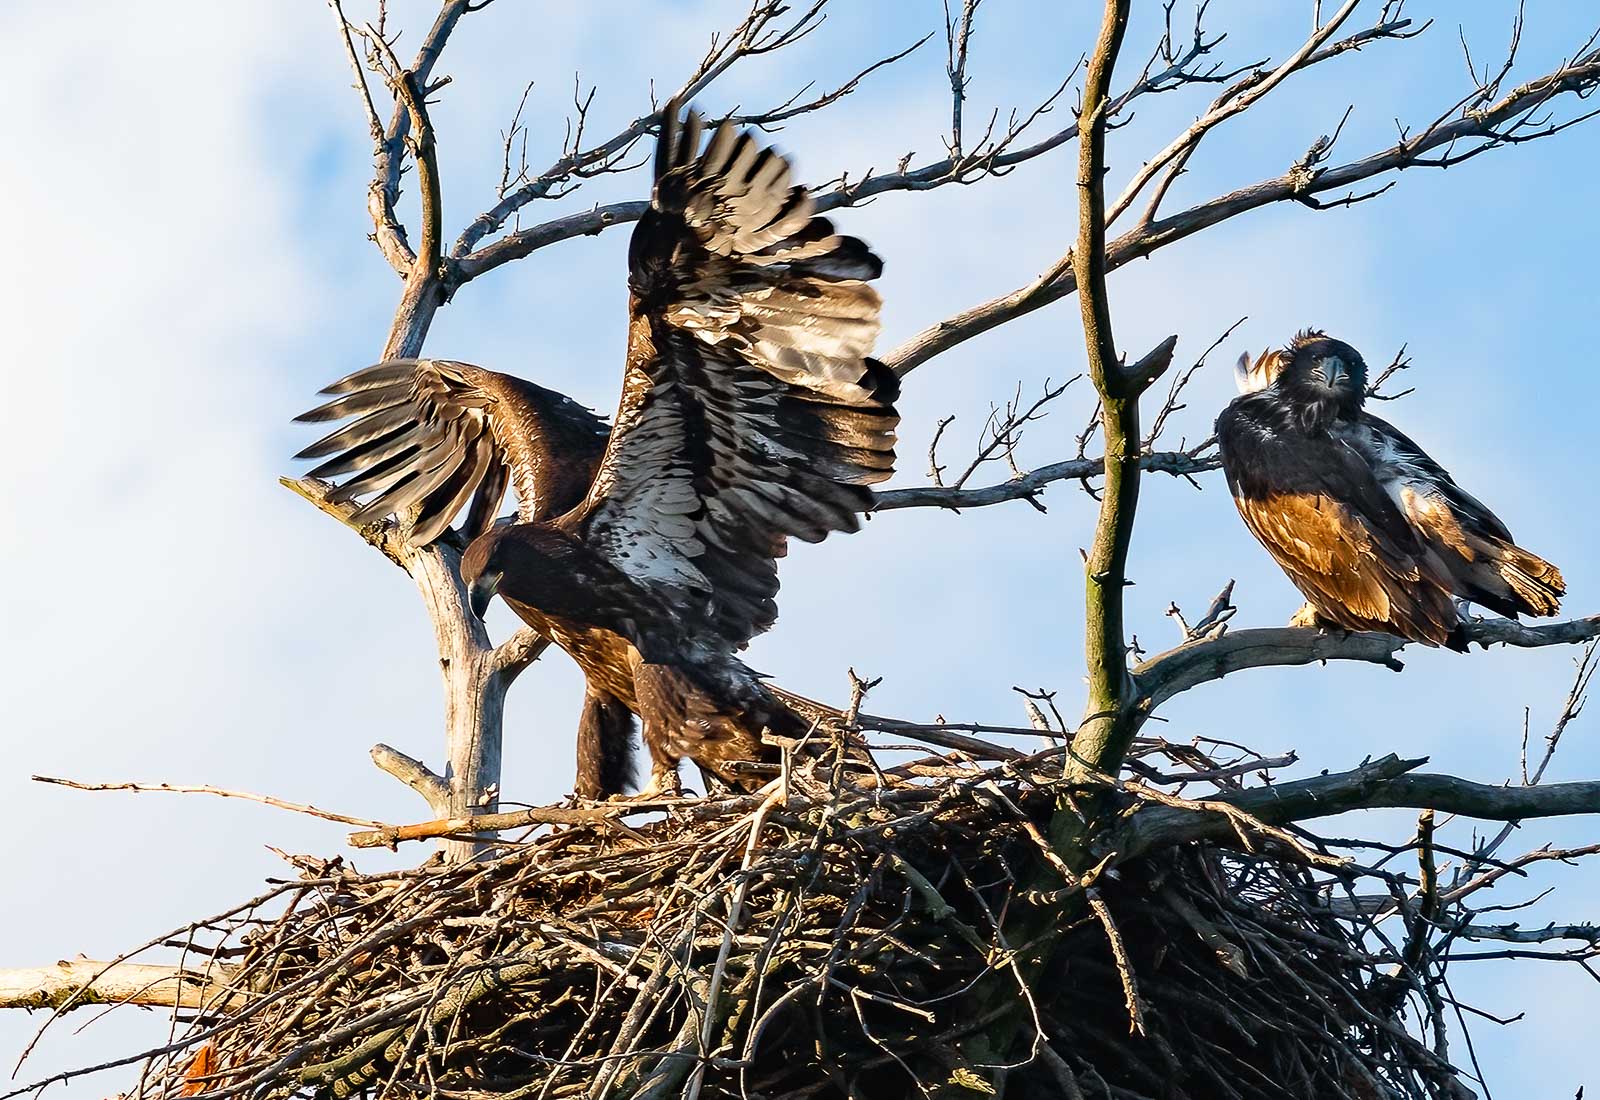 Eaglets branching and preparing to fly